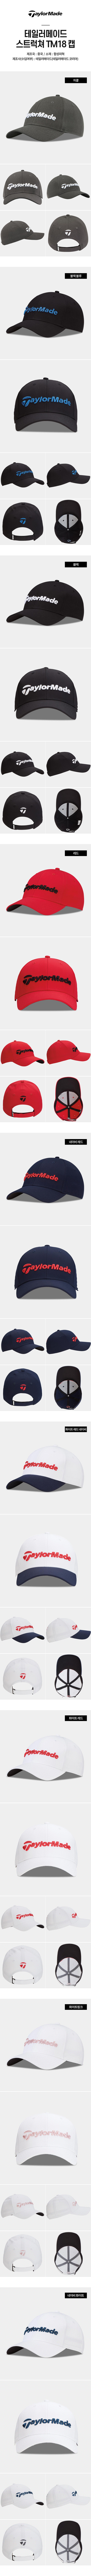 taylormade_structure_cap_22.jpg